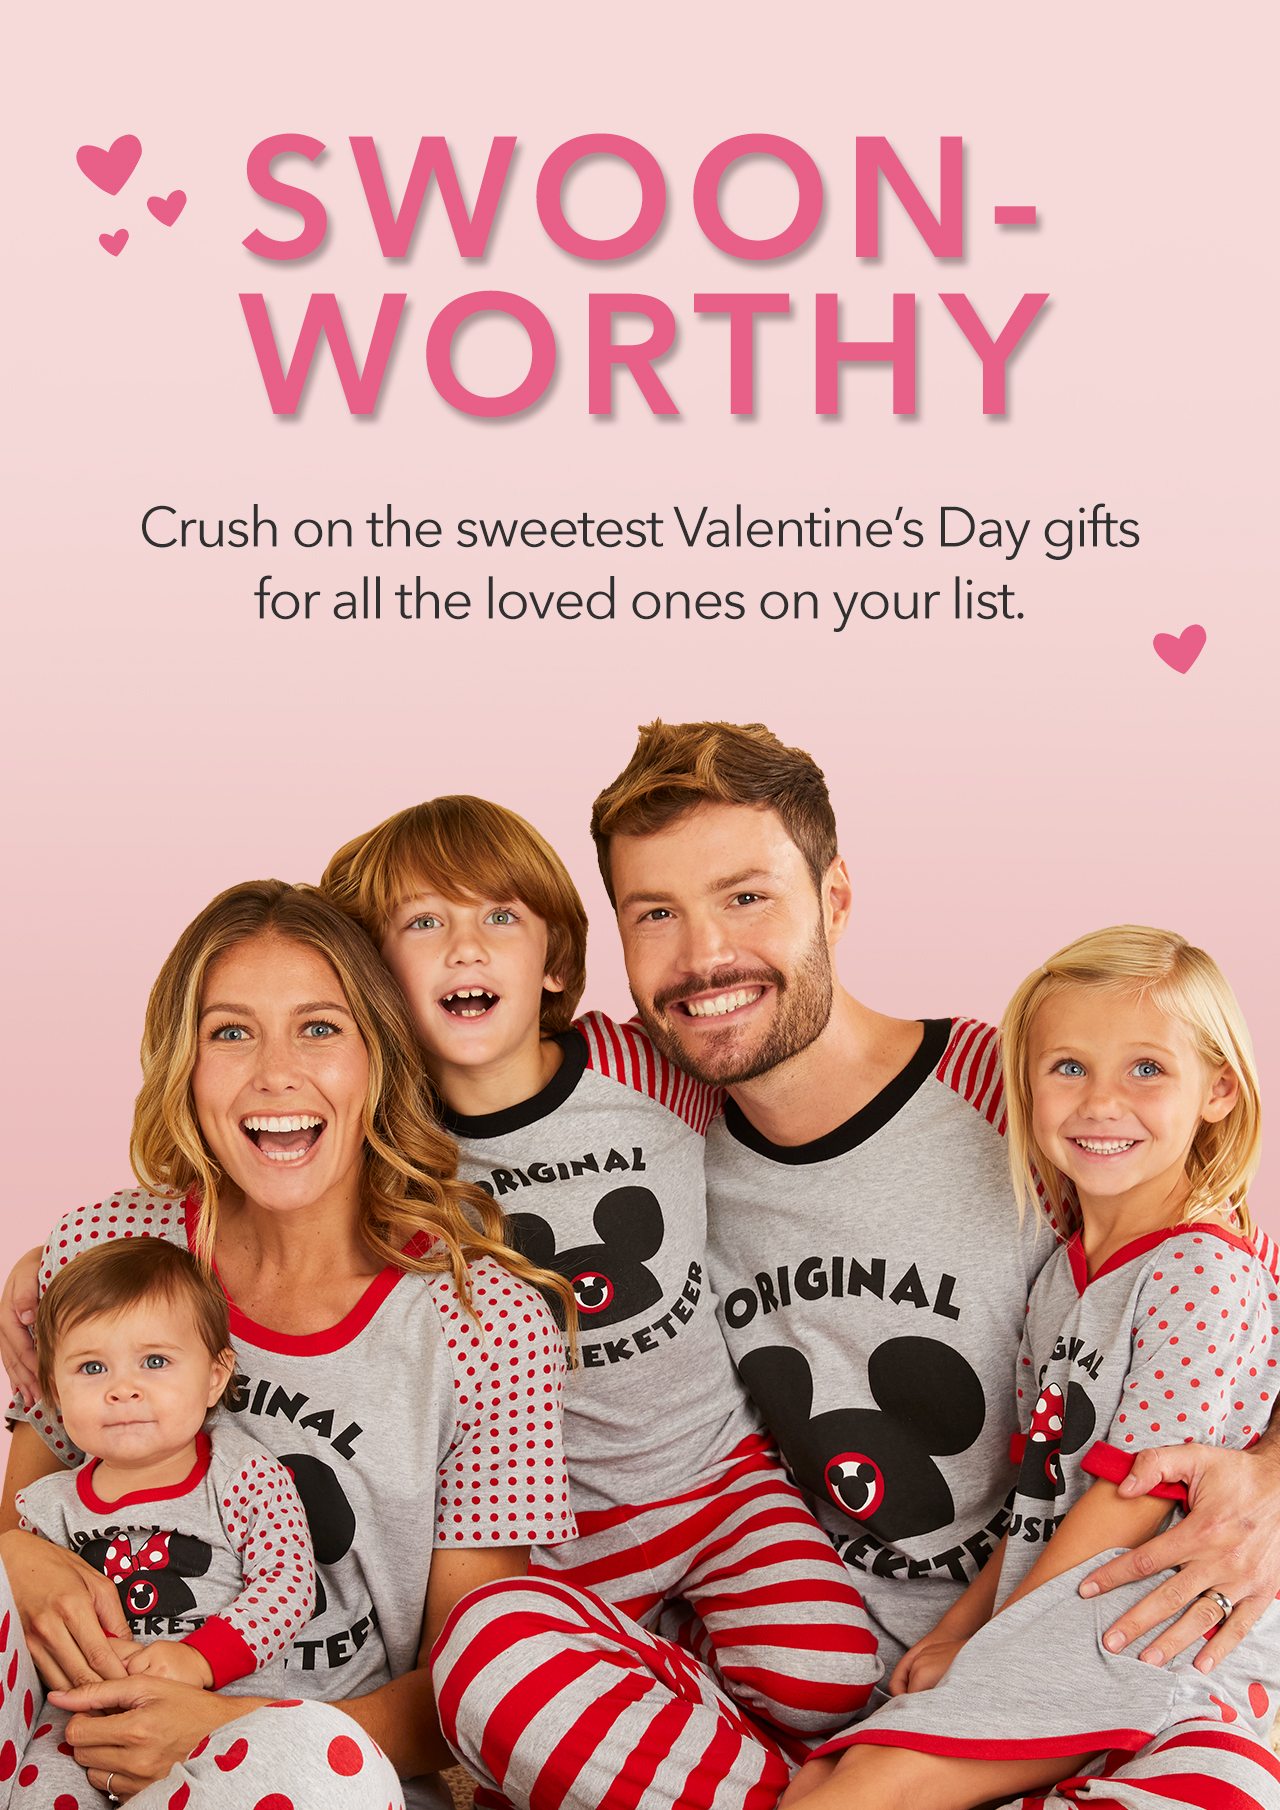 Swoon-Worthy, Crush on the sweetest Valentines Day gifts for all the loved ones on your list. | Shop Now